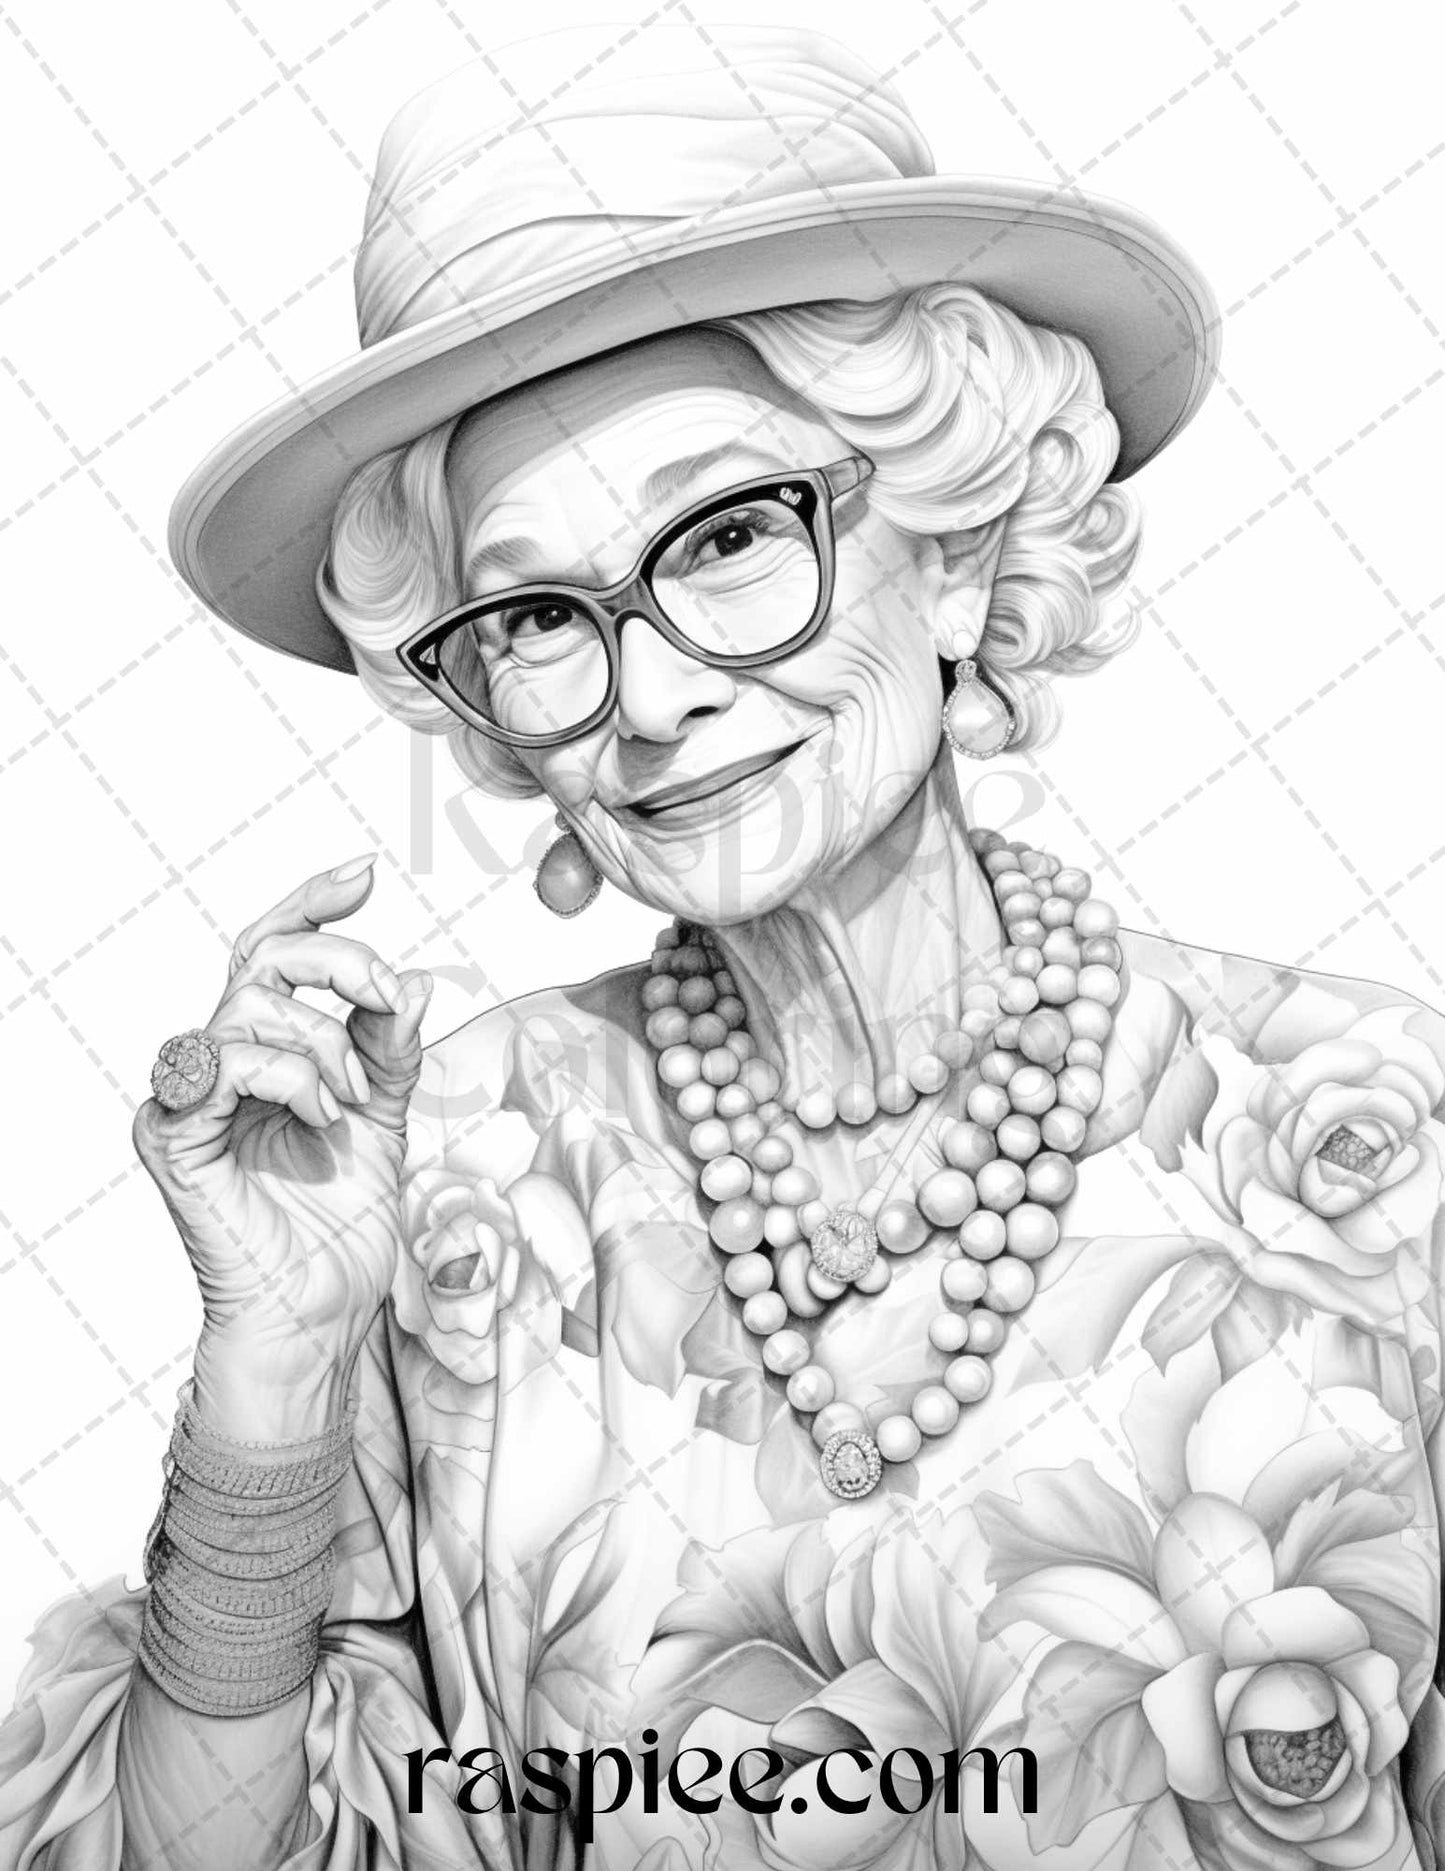 40 Fashionista Grandma Grayscale Coloring Pages Printable for Adults, PDF File Instant Download